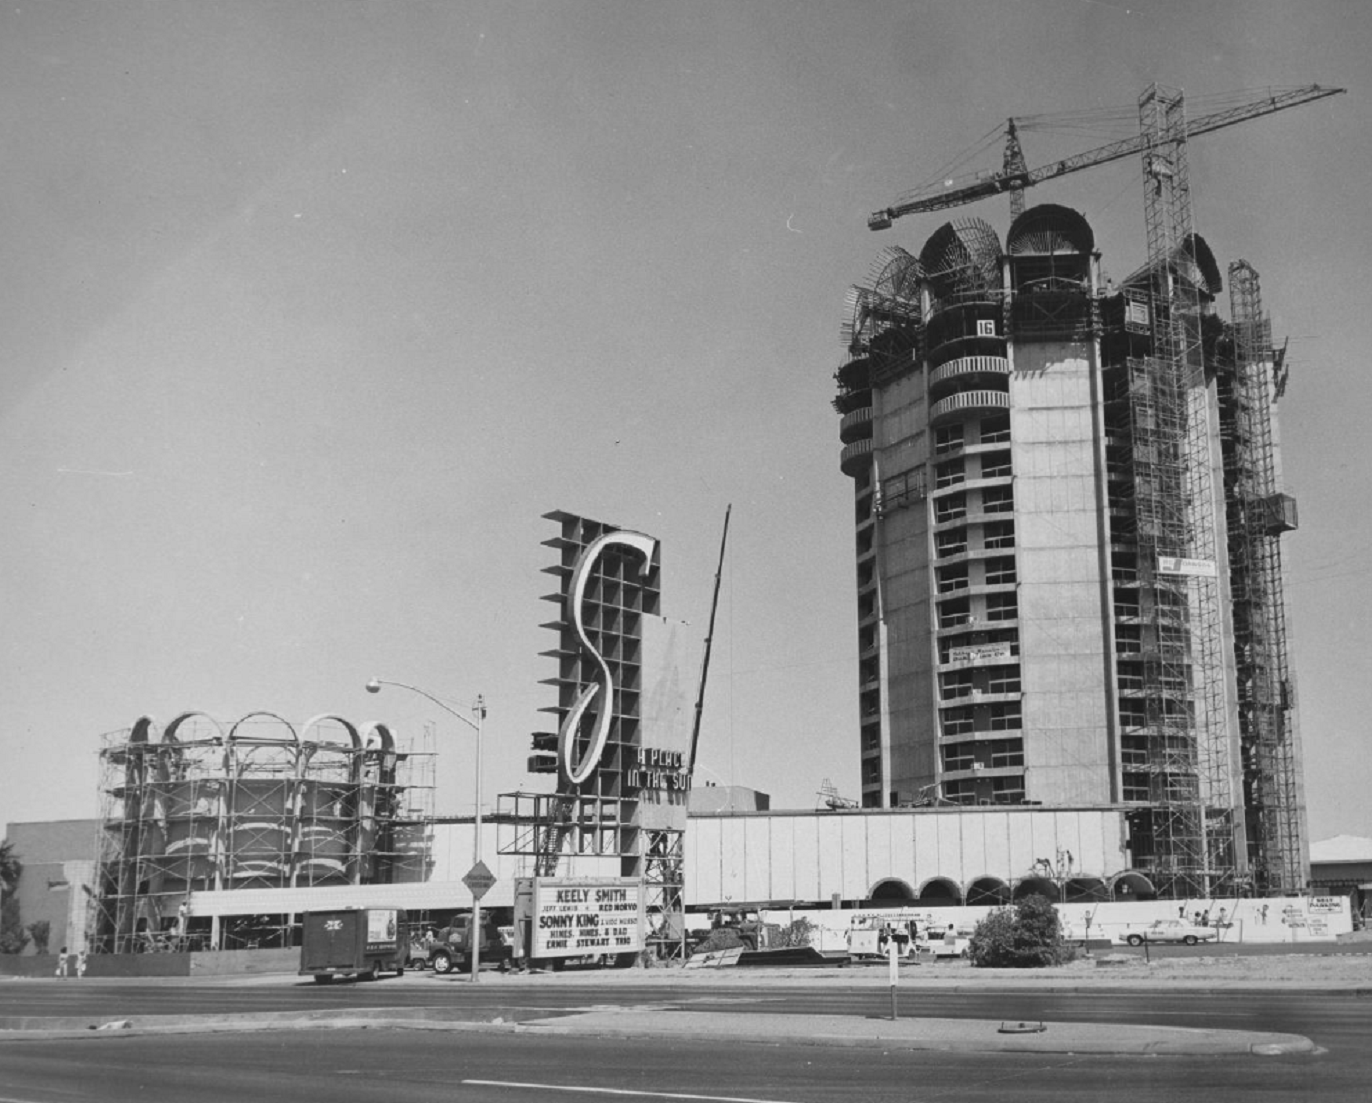 1965: Sands Hotel and Sign Being Rebuilt